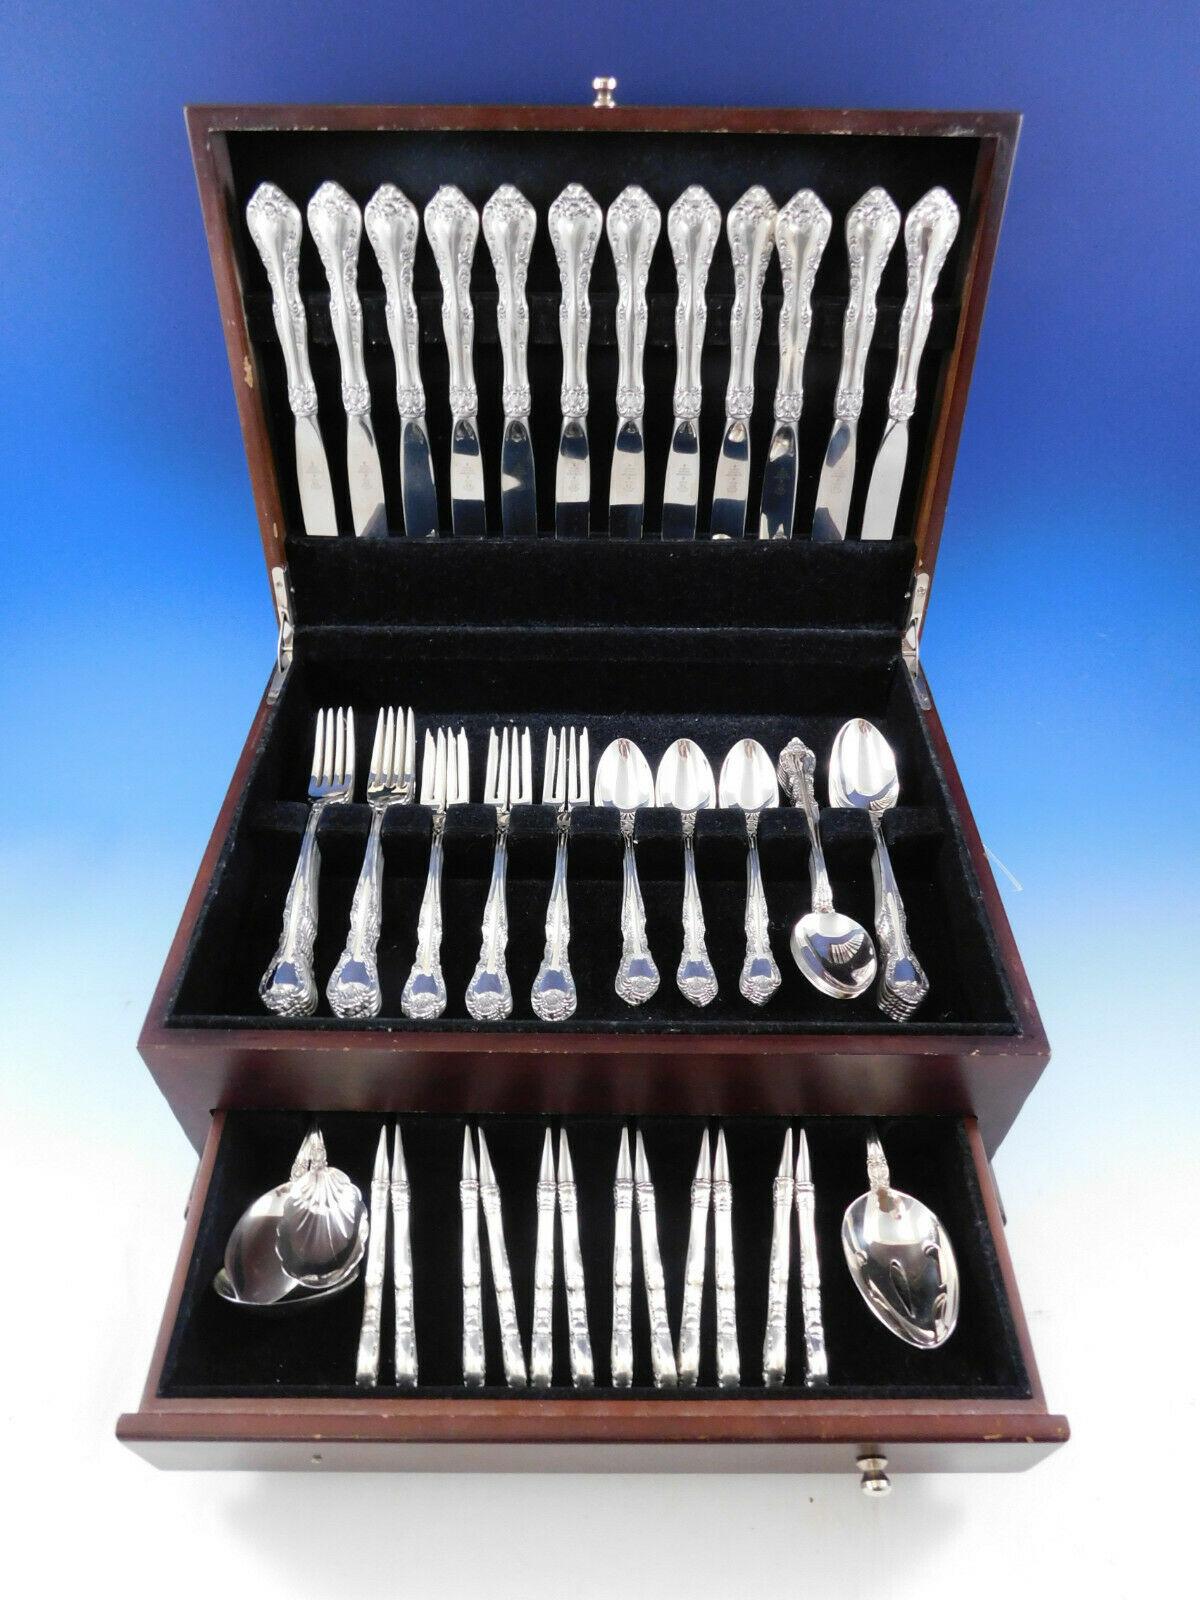 Alencon Lace by Gorham circa 1965 sterling silver flatware set of 77 pieces. This set includes:

12 knives, 9 1/8